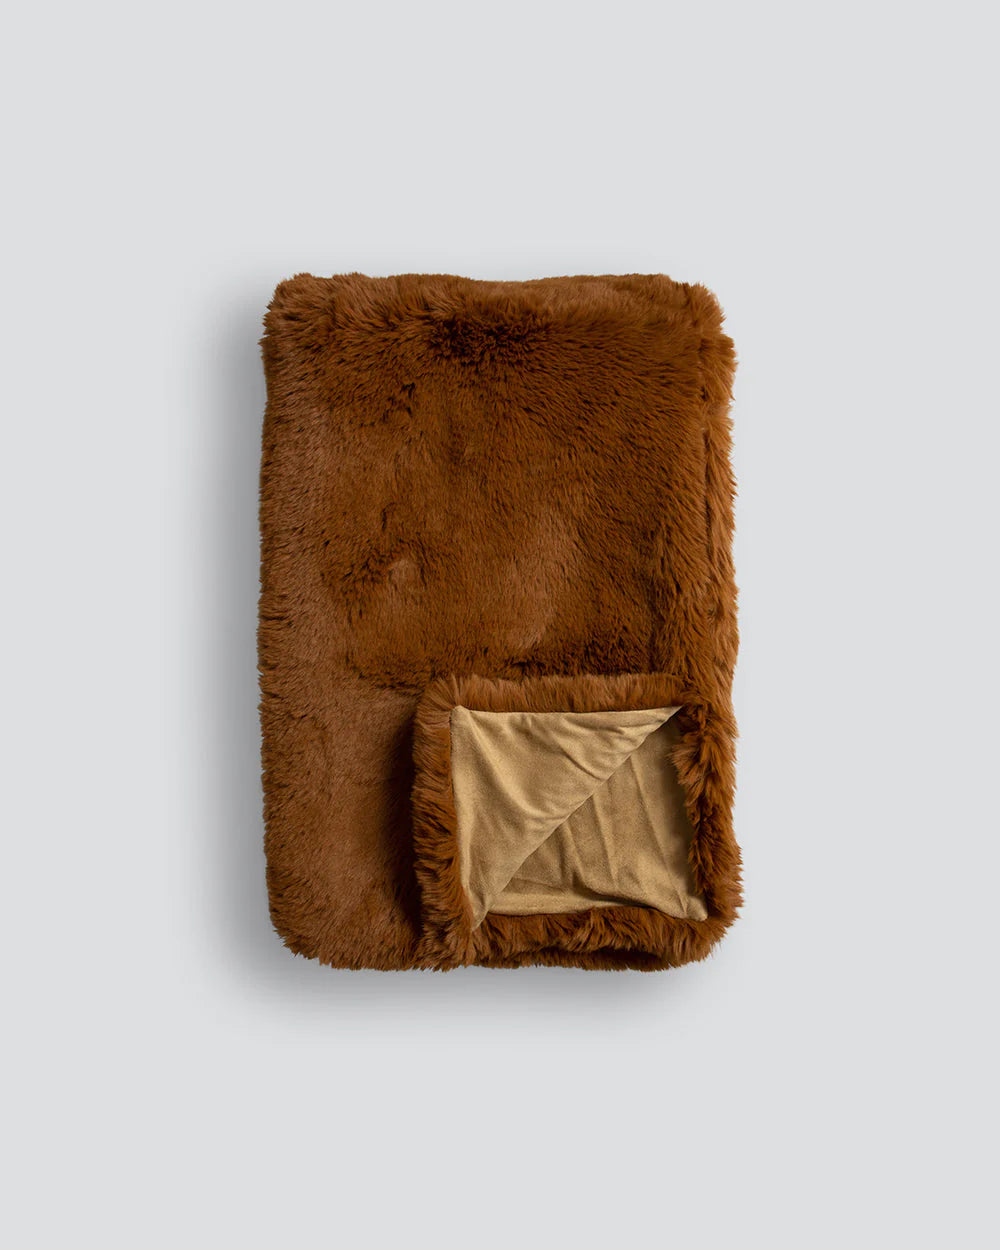 Baya Pele Faux Fur Sienna Throw Rug Blanket is available from Make Your House A Home Premium Stockist. Furniture Store Bendigo, Victoria. Australia Wide Delivery. Furtex.